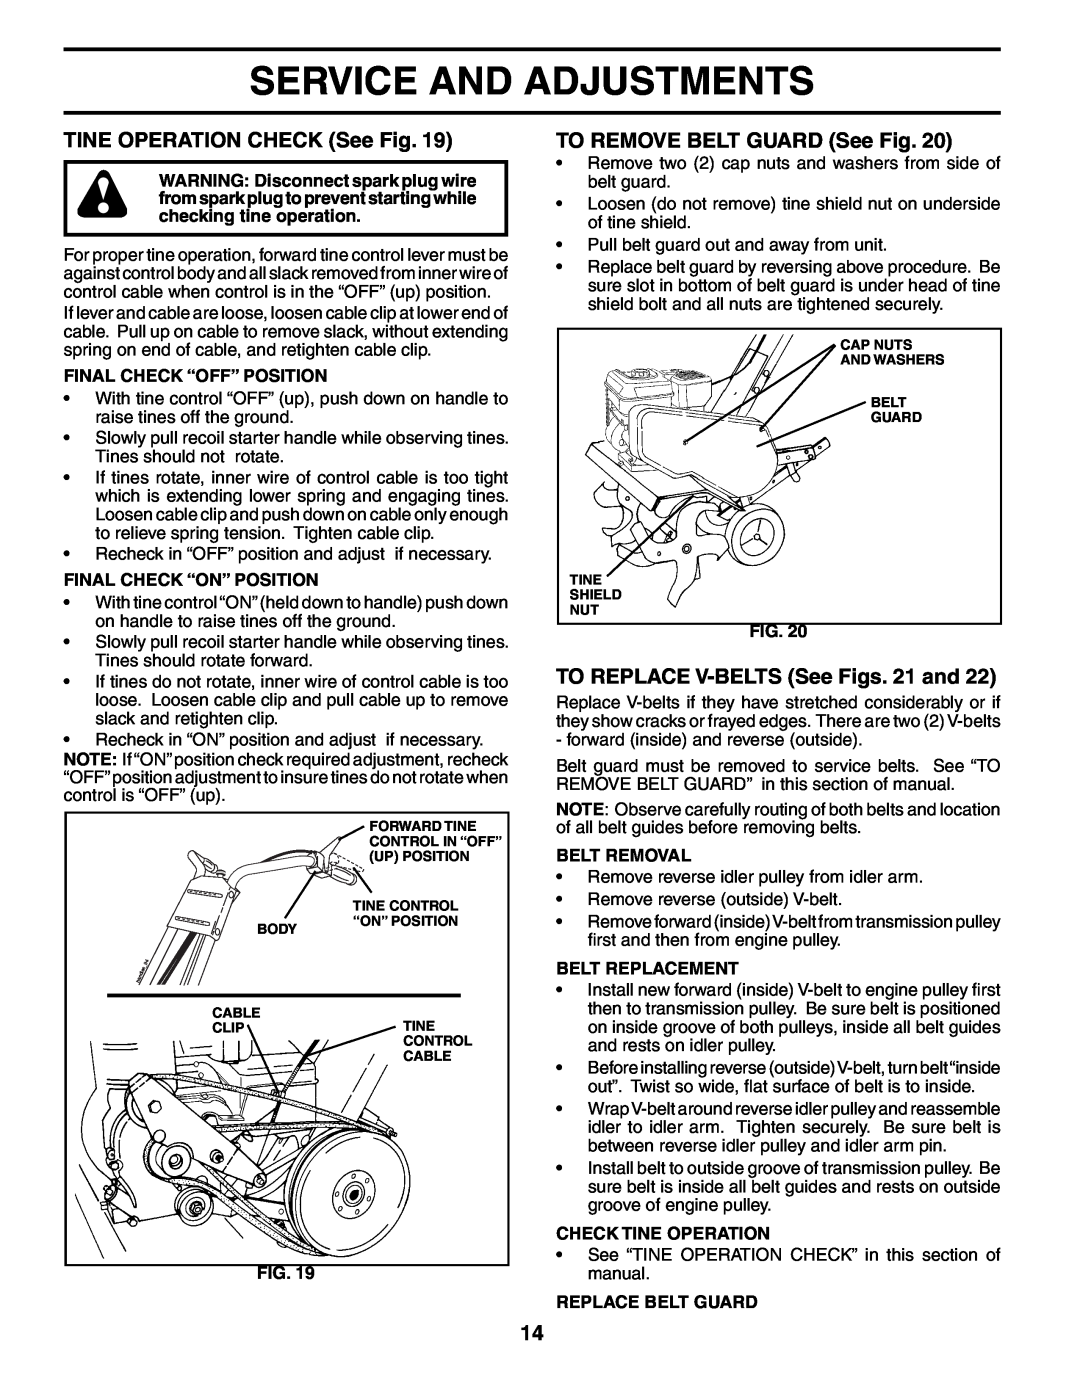 Poulan HDF550N owner manual TINE OPERATION CHECK See Fig, TO REMOVE BELT GUARD See Fig, TO REPLACE V-BELTS See Figs. 21 and 